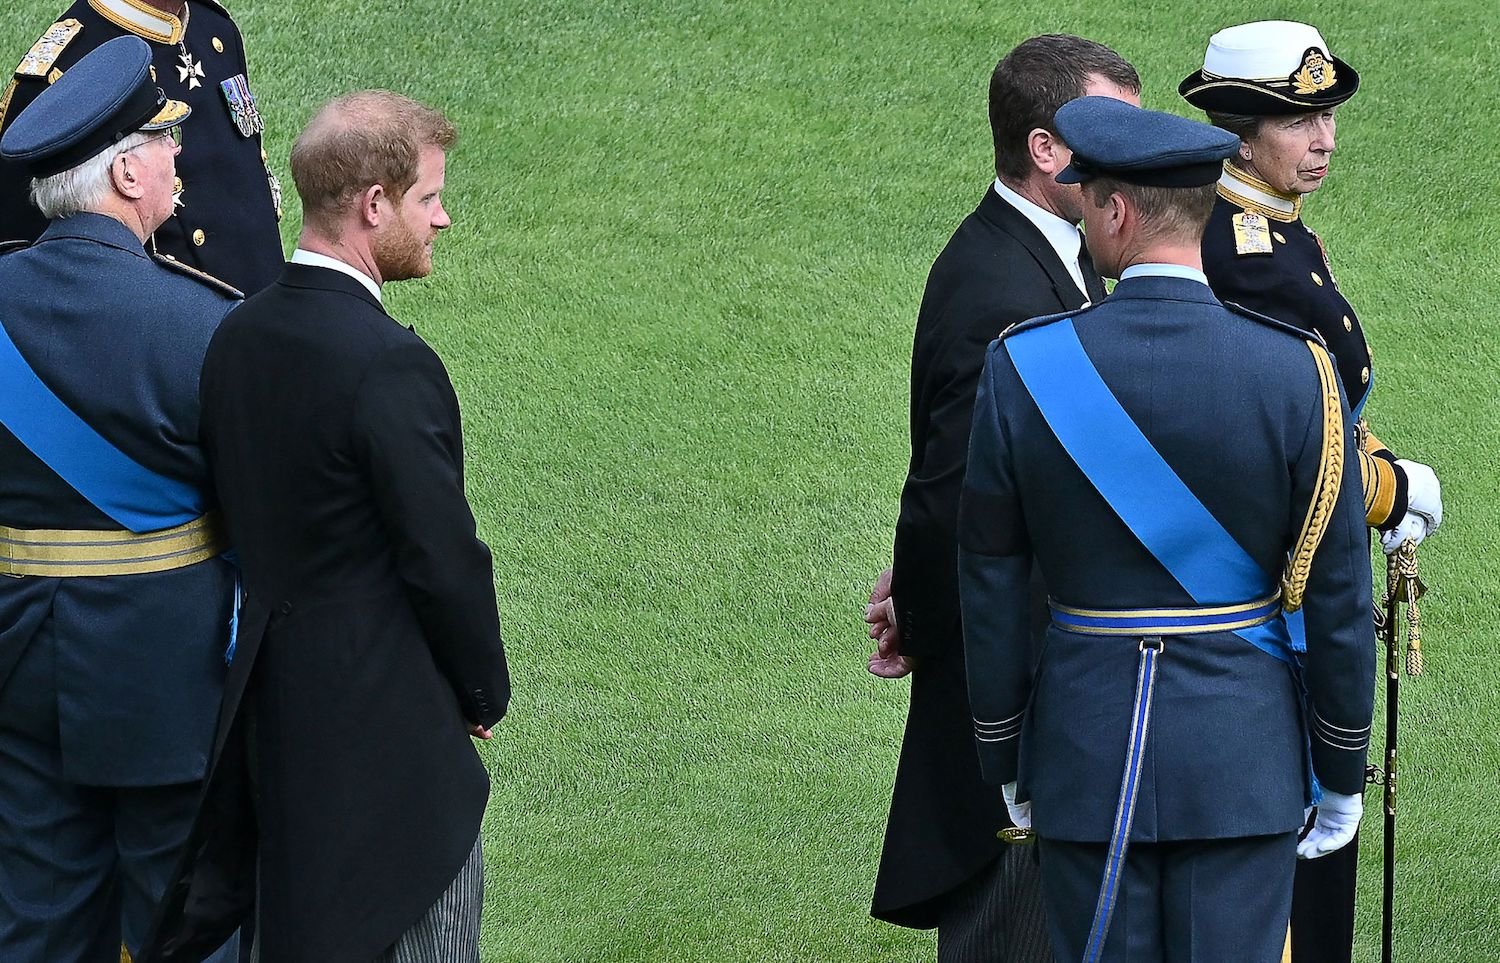 Body Language Expert Points Out Subtle Prince William Gesture to Prince Harry at Queen’s Funeral May Indicate Tensions Easing